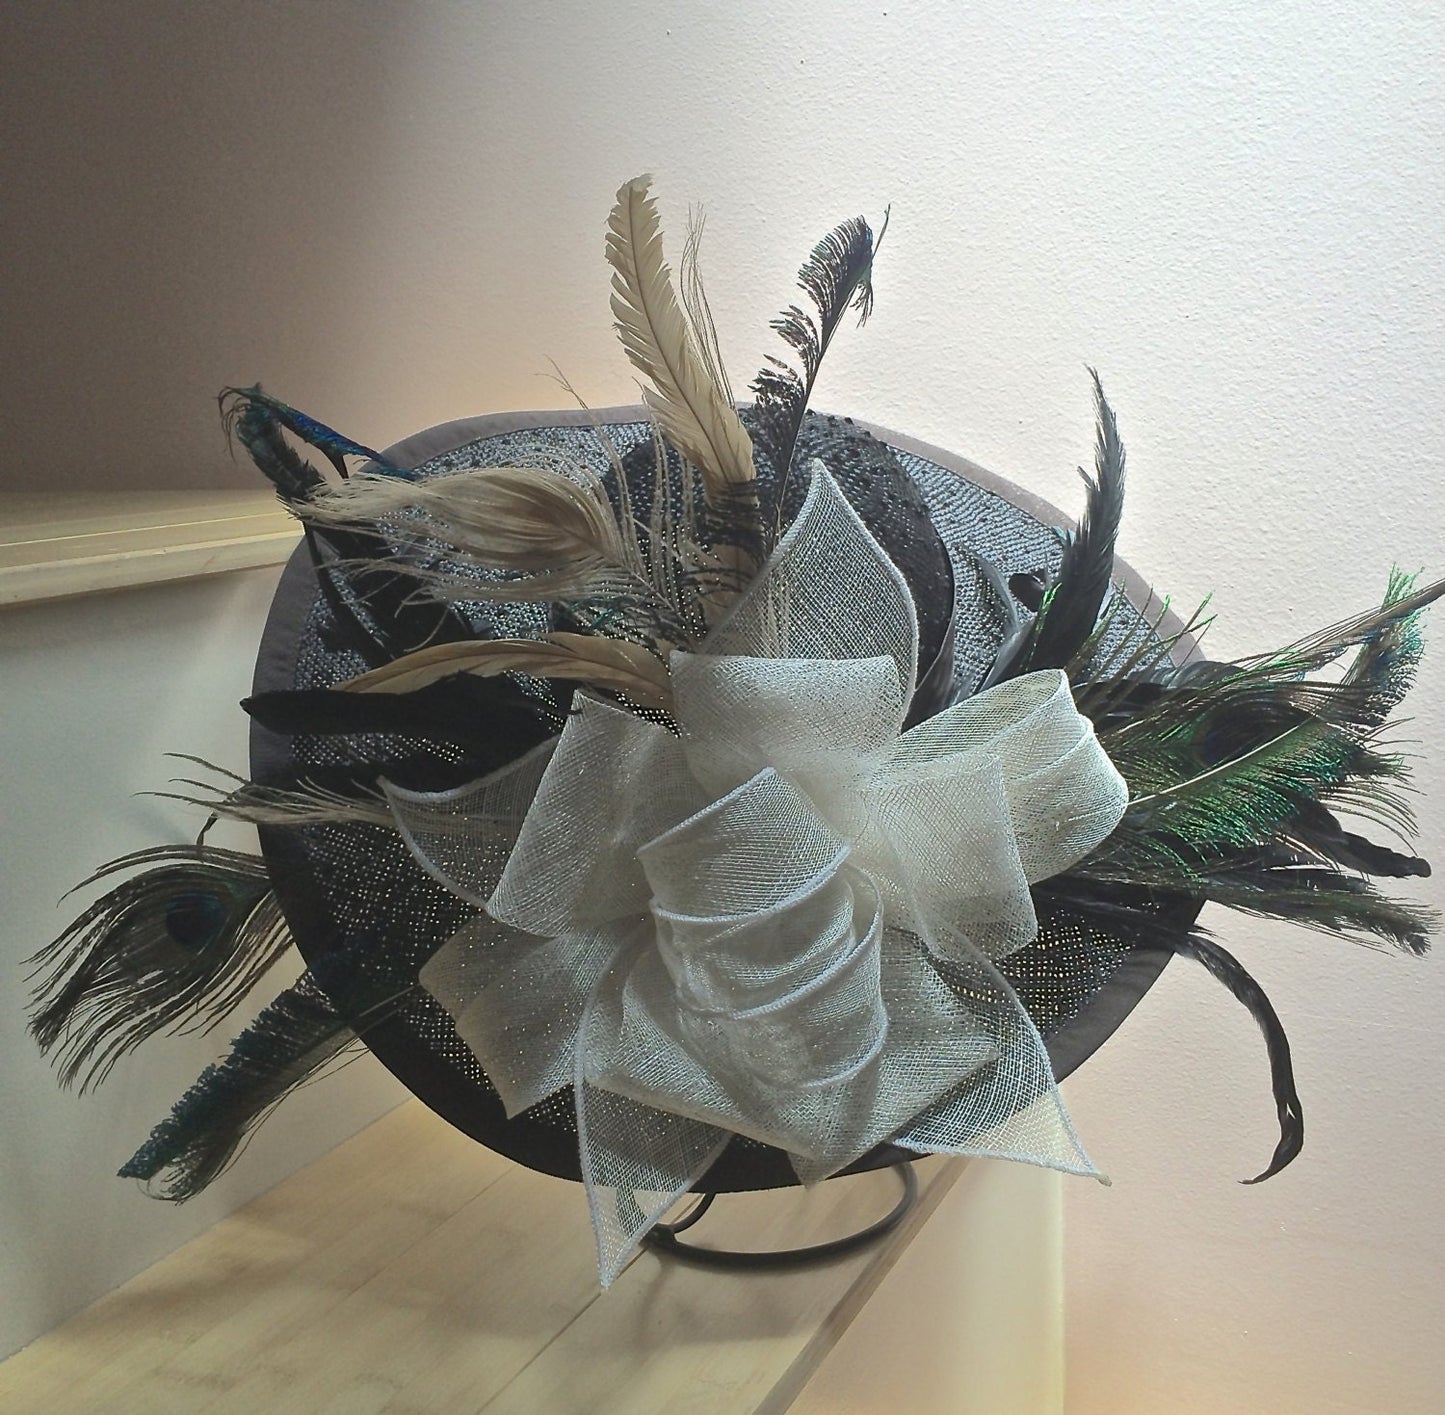 Large Black Derby or Church Hat with Feathers. Ivory sinamay Bow and Feathers from Peacocks and Roosters! Excellent for Polo Race Hat